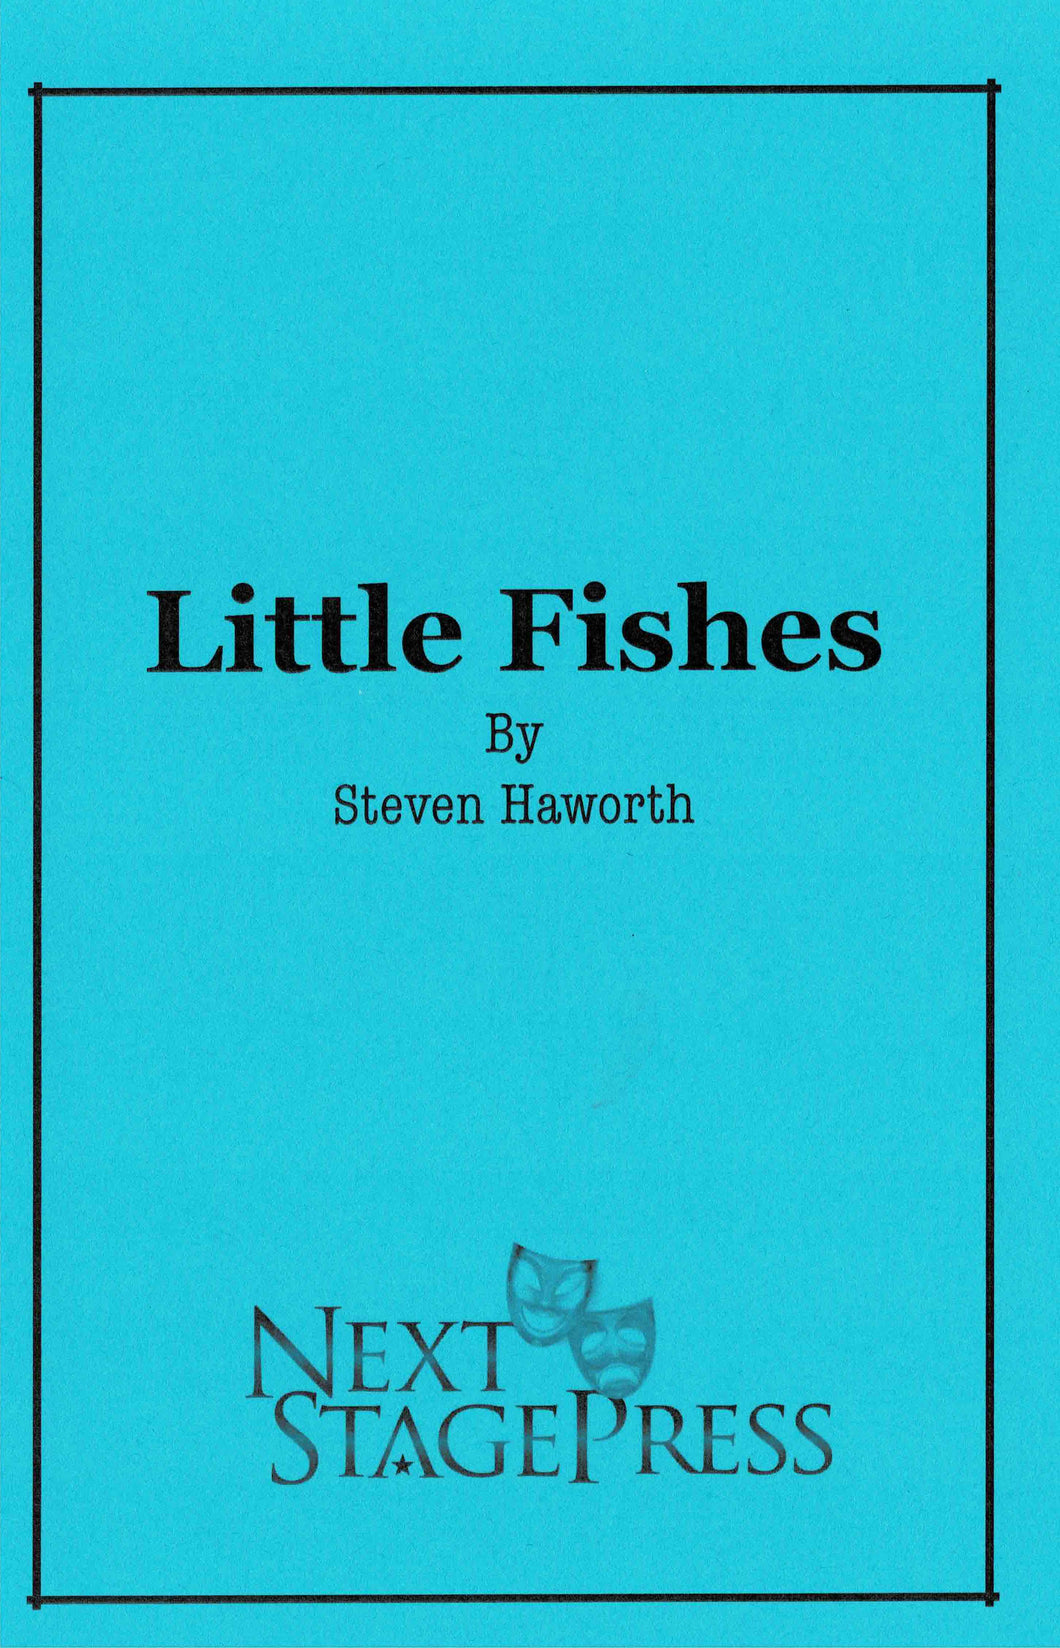 Little Fishes by Steven Haworth